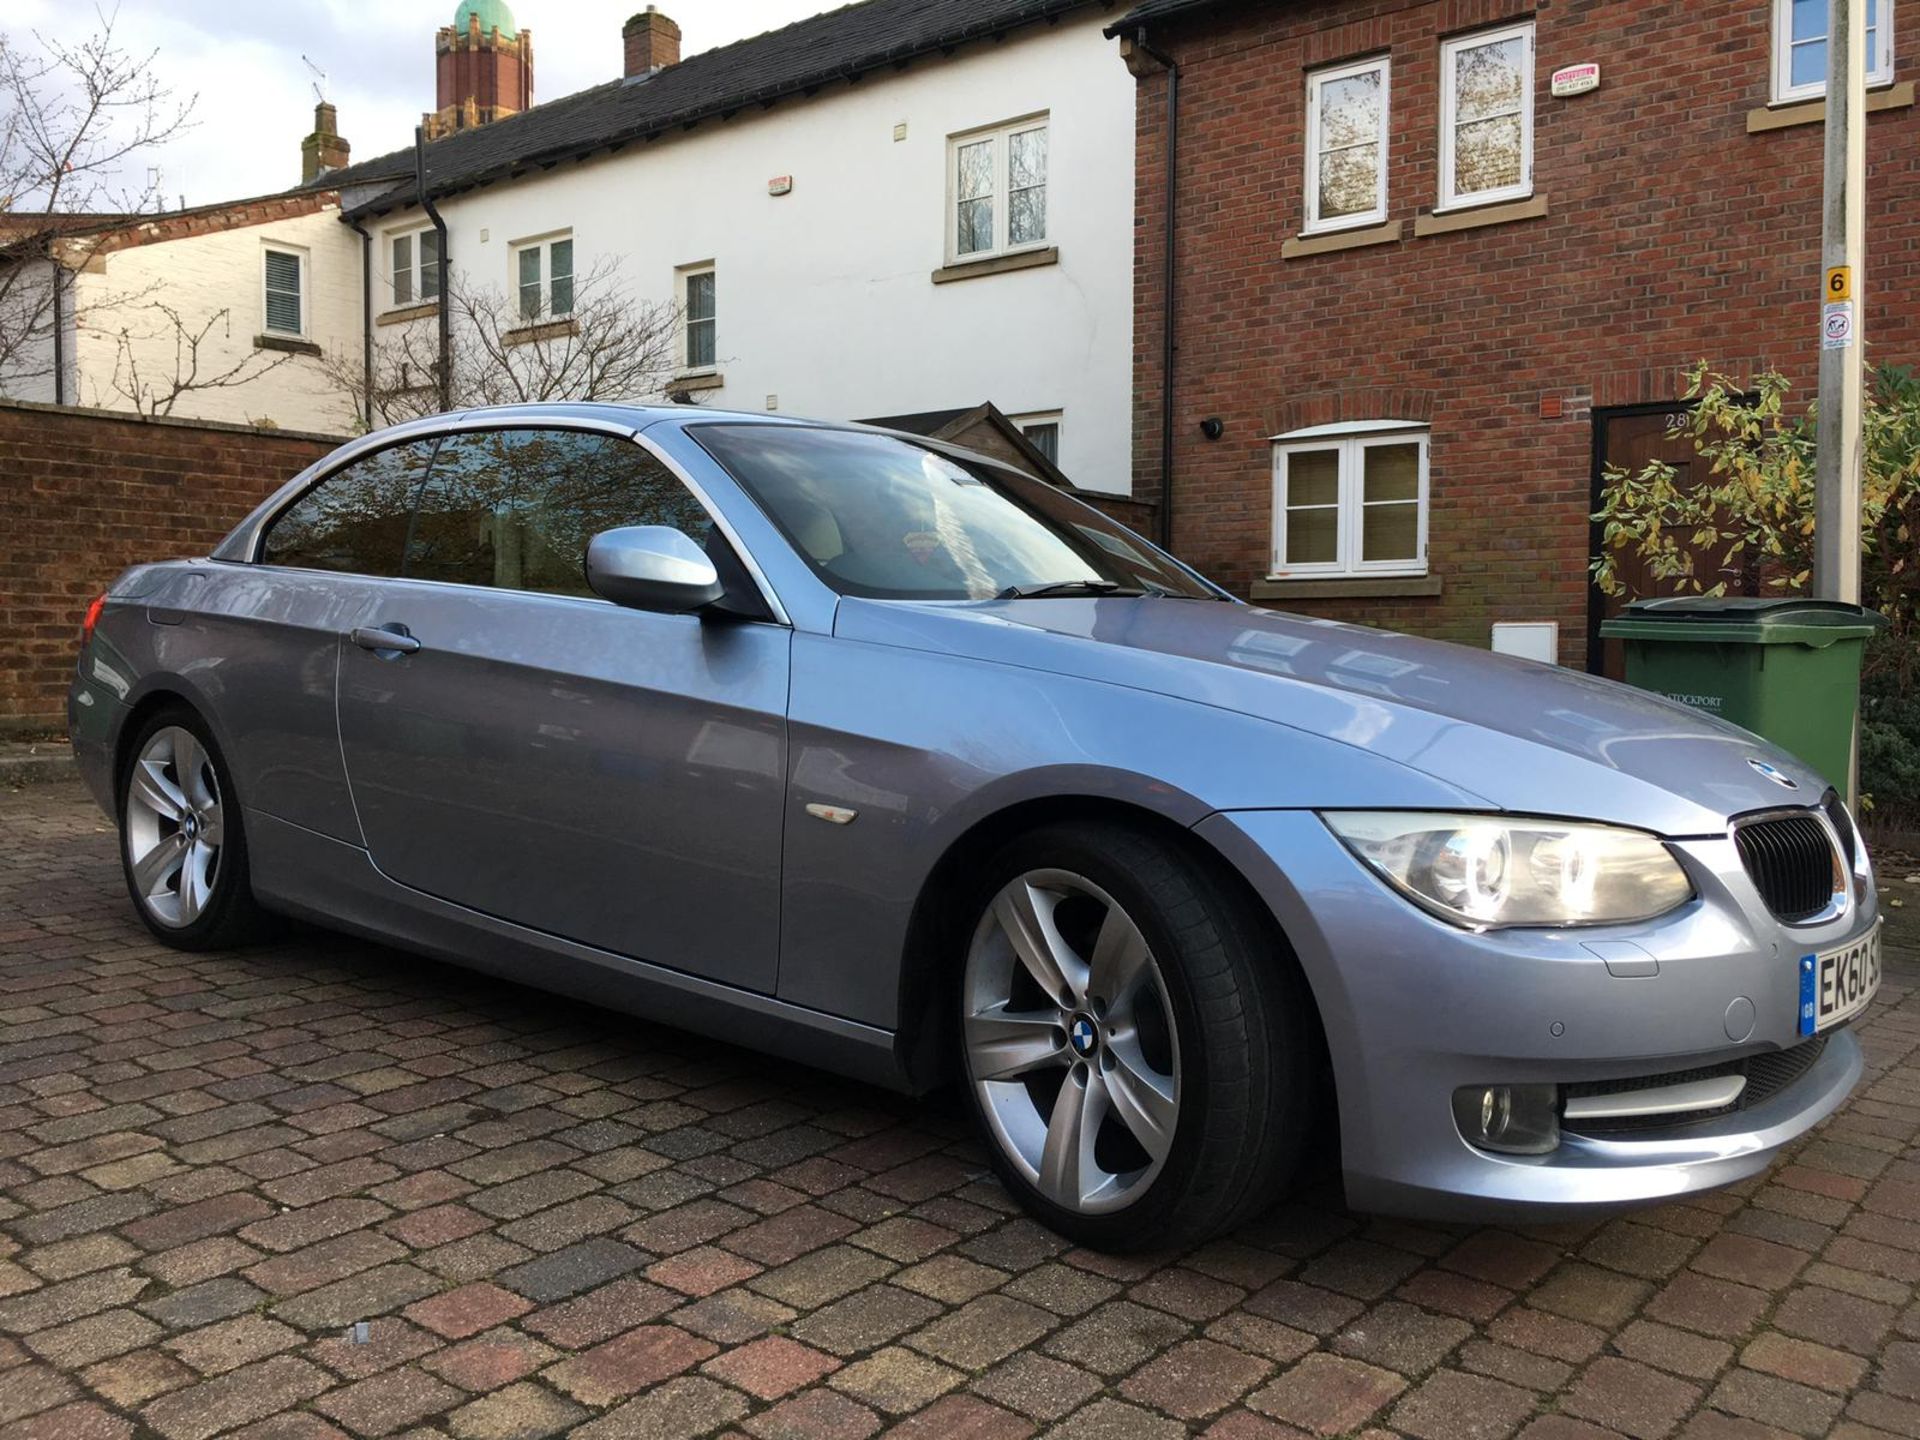 2010/60 REG BMW 320D SE AUTO 181 2.0 DIESEL BLUE CONVERTIBLE, SHOWING 3 FORMER KEEPERS *NO VAT*